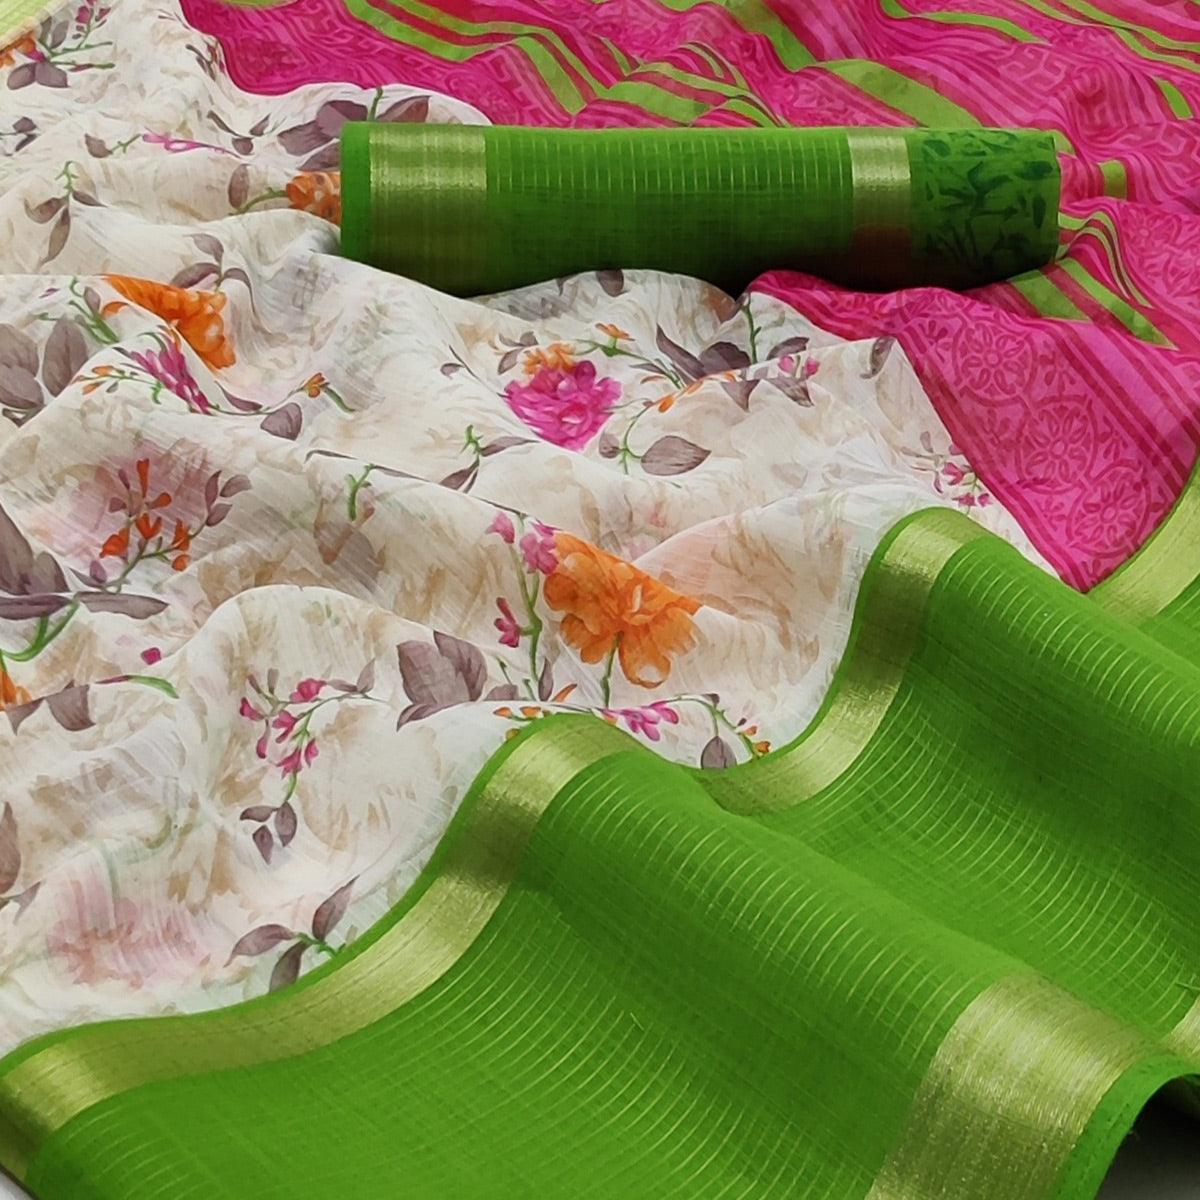 Off White & Green Casual Wear Floral Printed Cotton Saree With Woven Border - Peachmode